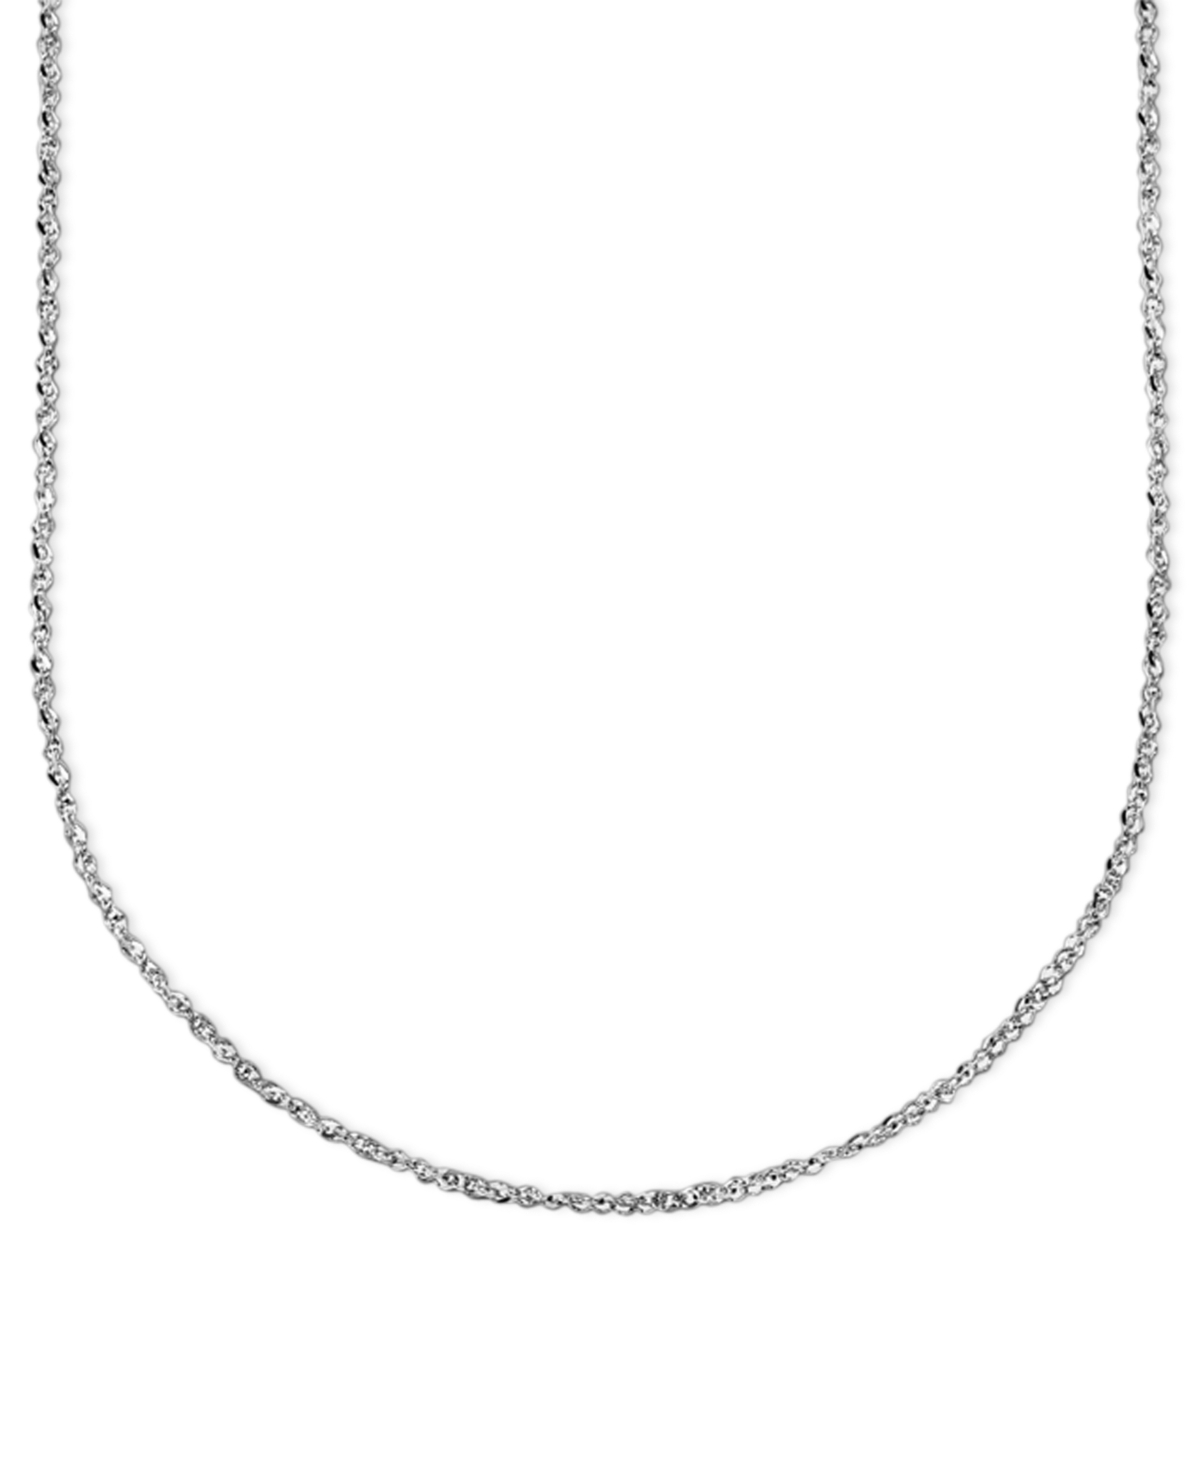 Italian Gold 14k White Gold 18" Perfectina Chain Necklace (1-1/8mm)